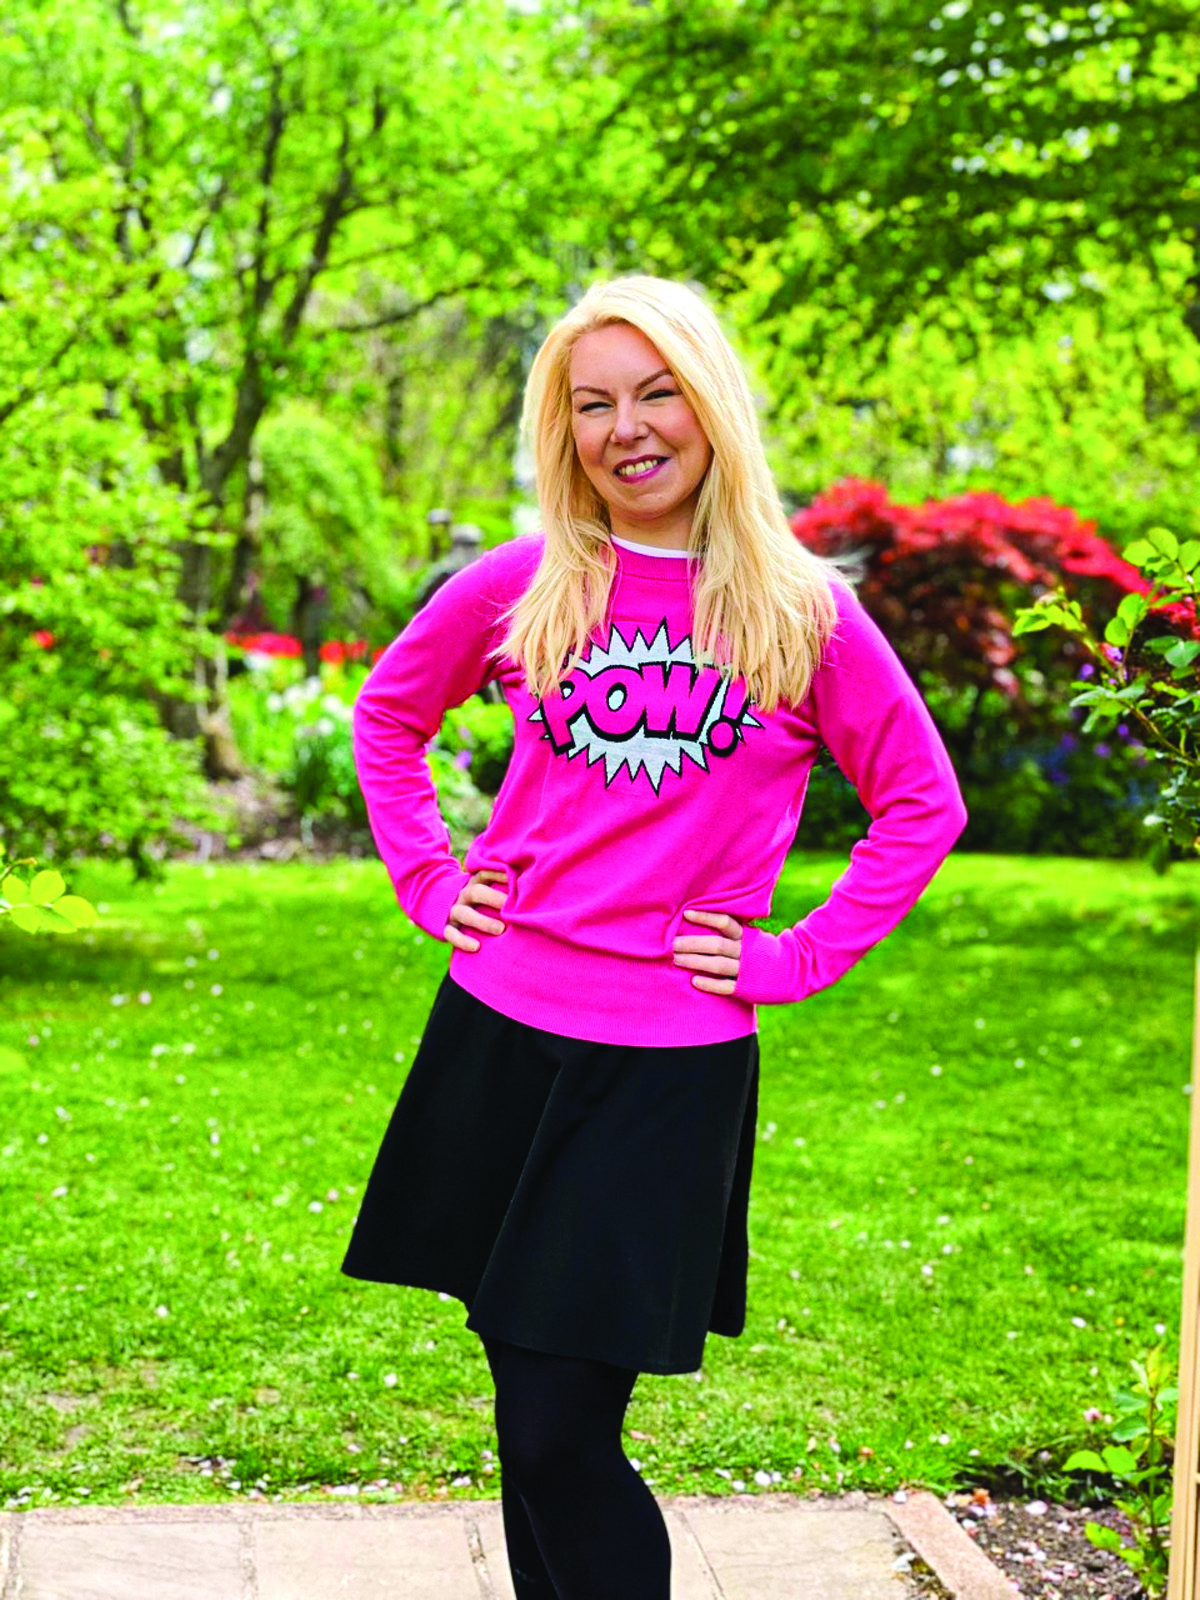 A portrait of Lauren Wright, standing in a garden, wearing a bright pink jumper with a comic book style 